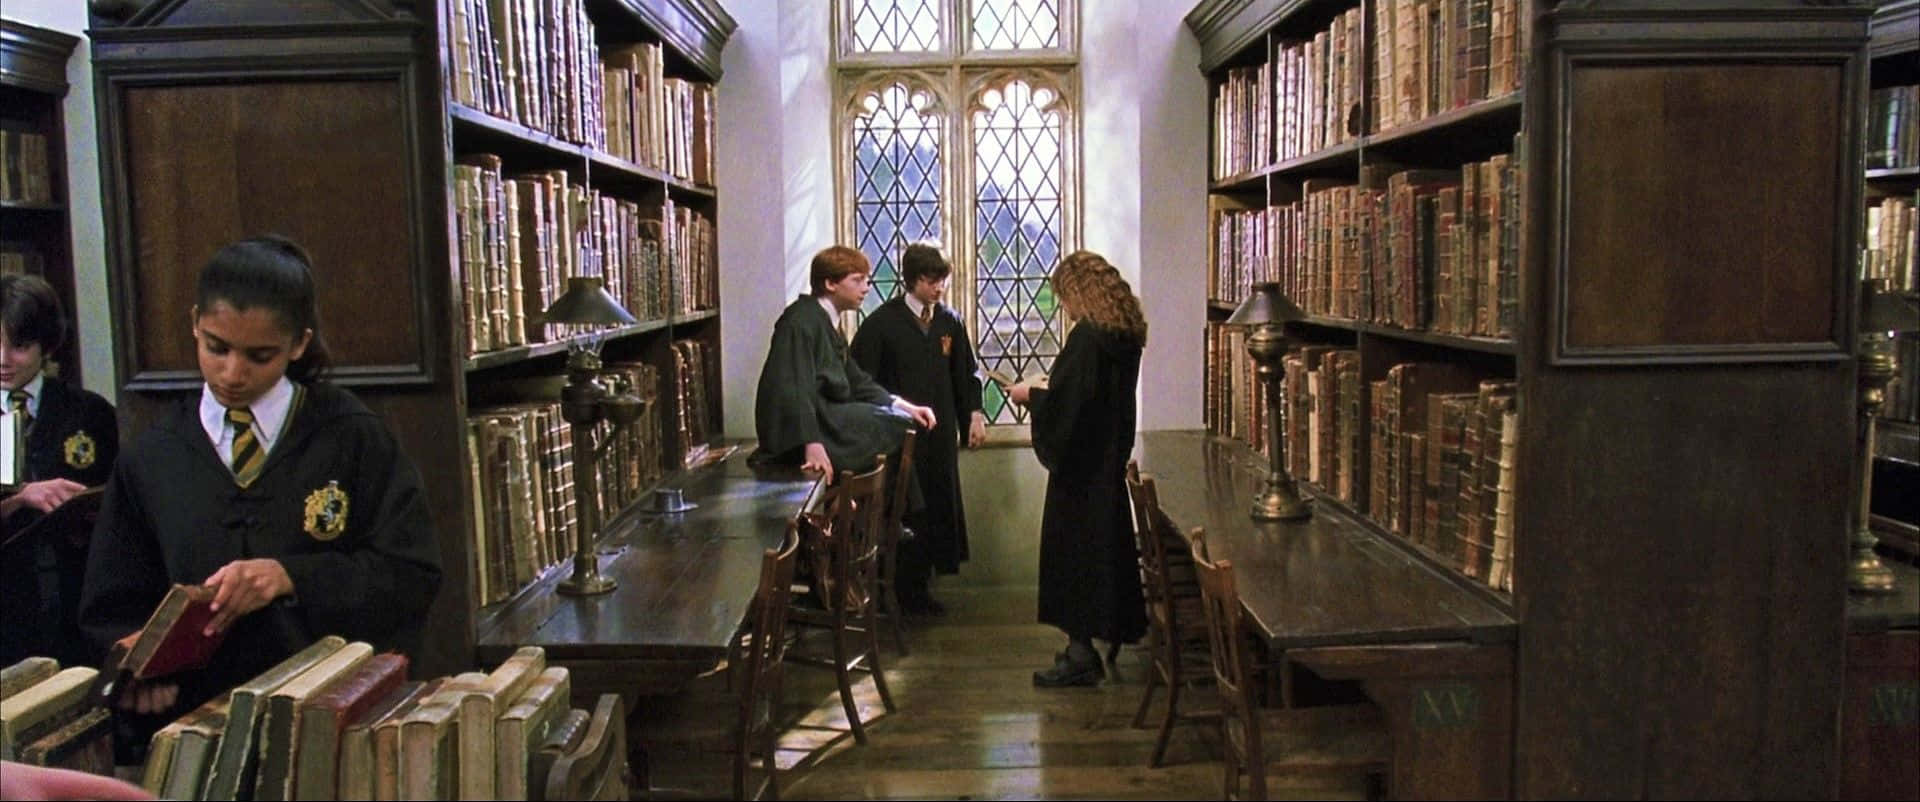 "Immersive in history and magic - the Hogwarts Library" Wallpaper